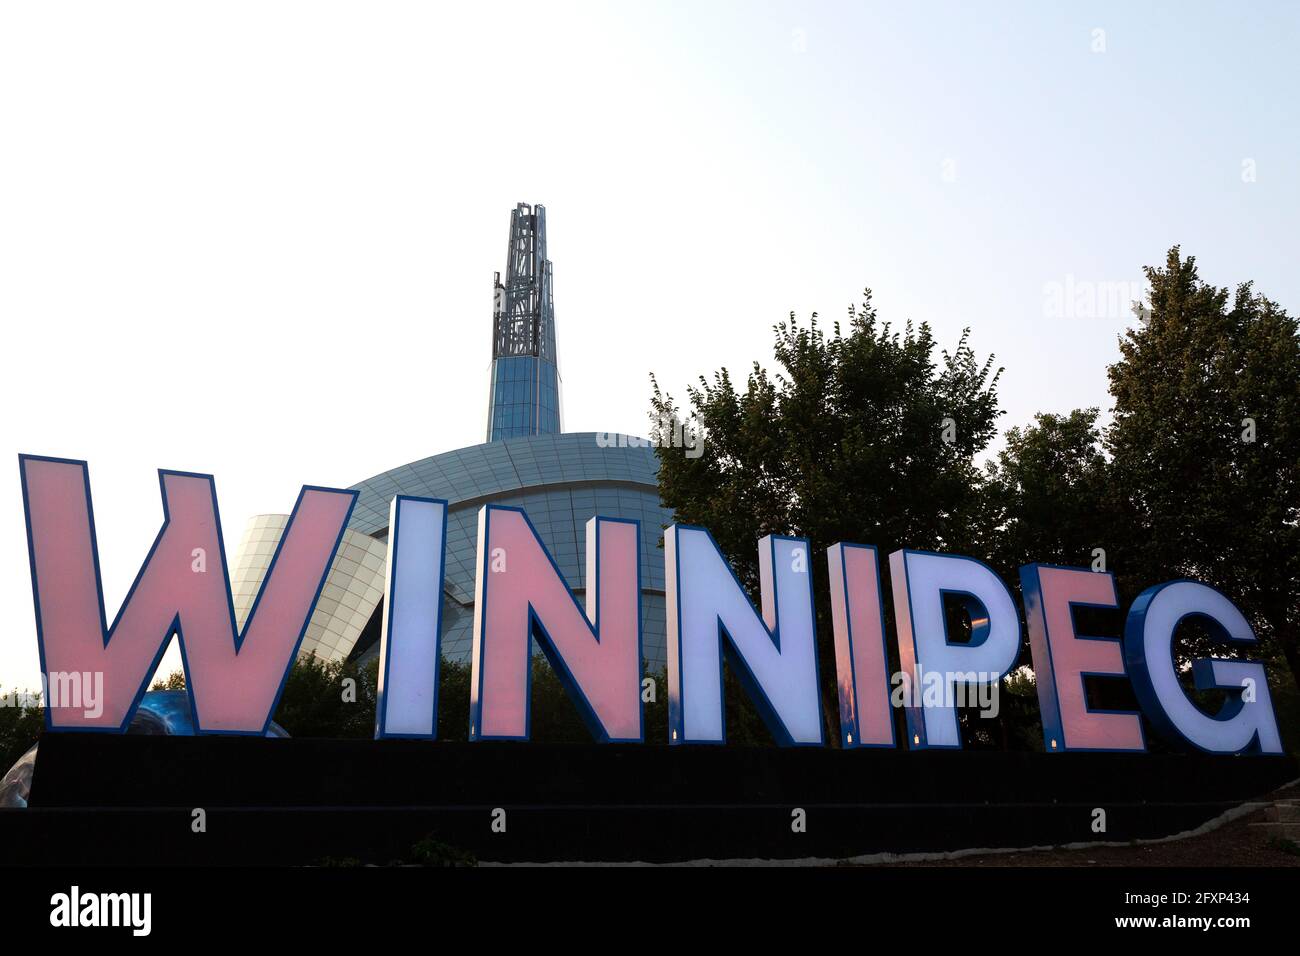 Winnipeg sign outside of the Canadian Museum for Human Rights in Manitoba, Canada. The sign is at The Forks. Stock Photo